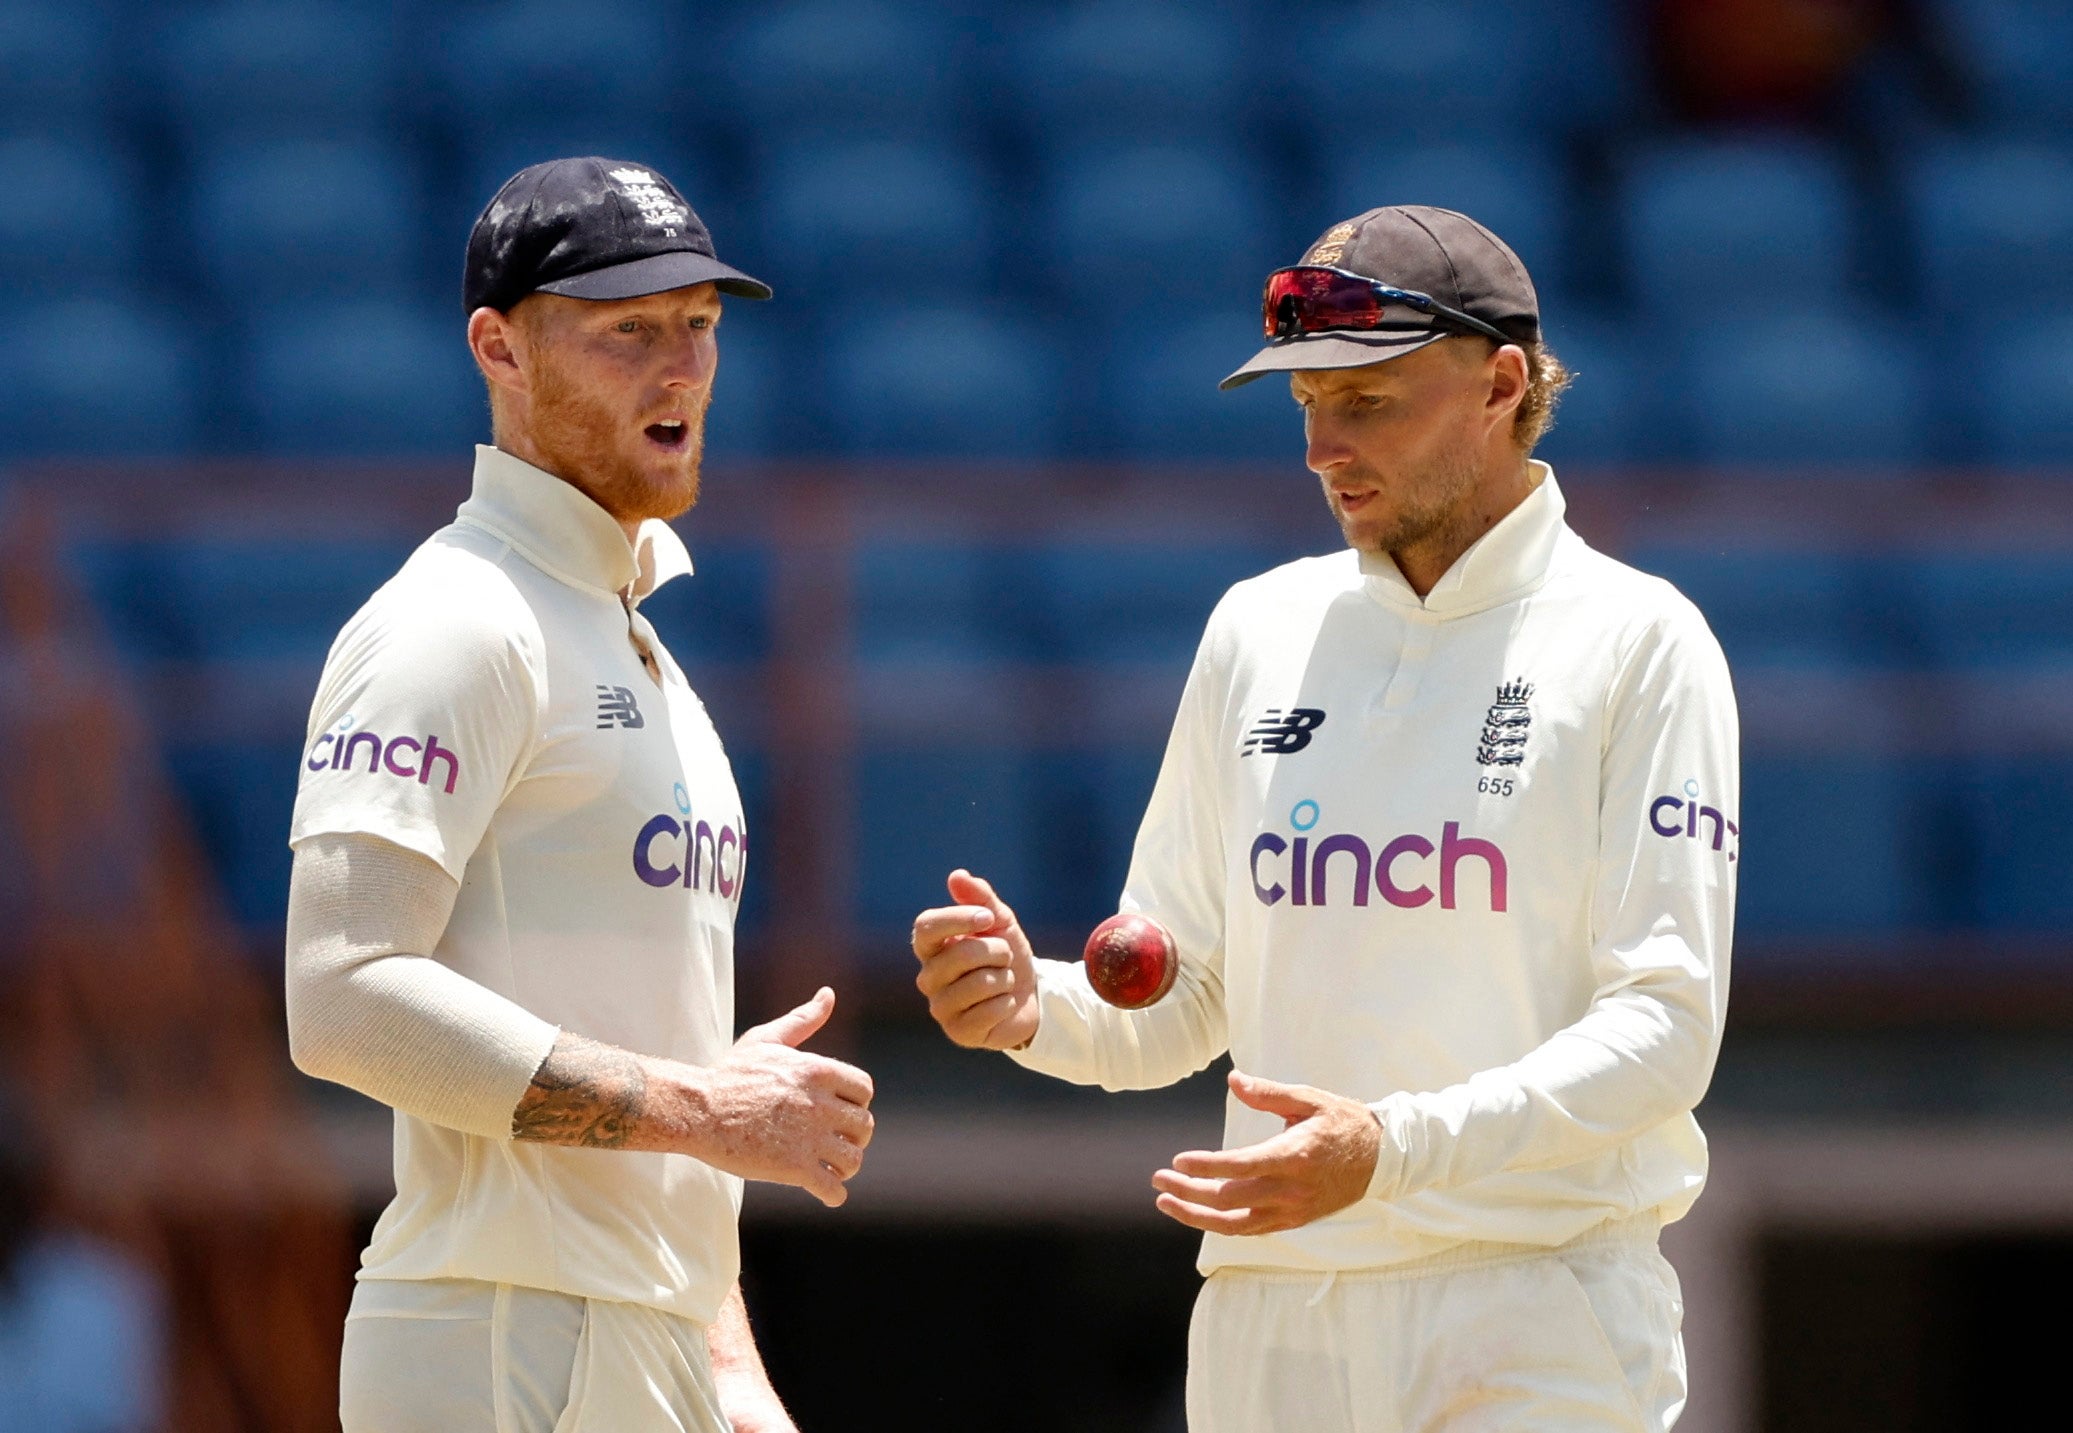 Ben Stokes will follow in Joe Root’s footsteps as England skipper but be a different style of captain